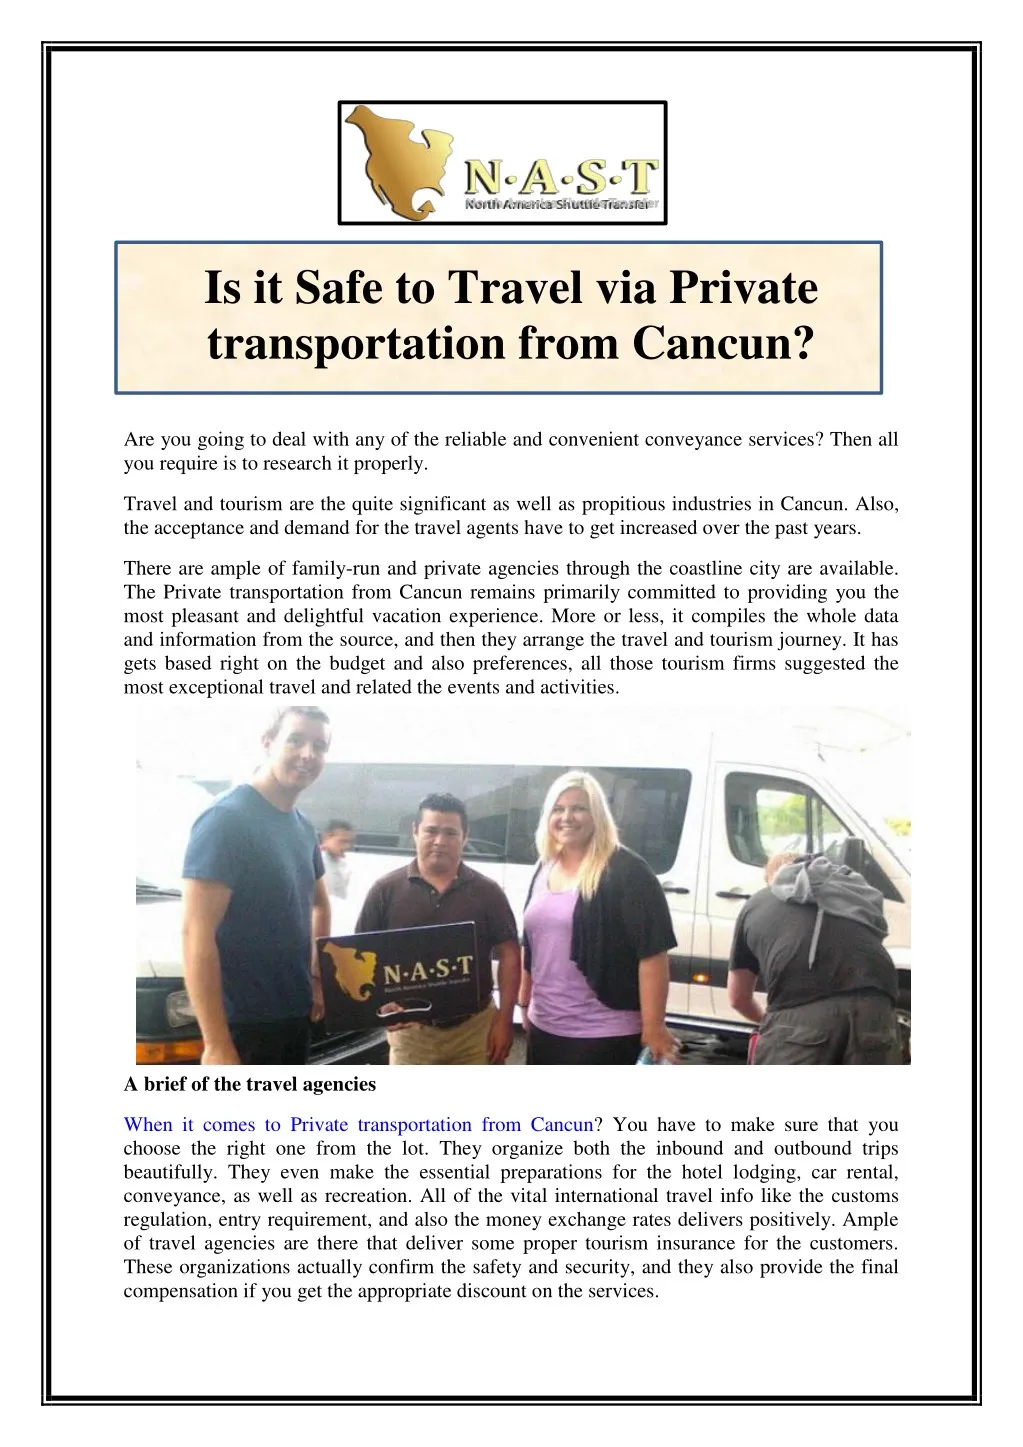 is it safe to travel via private transportation